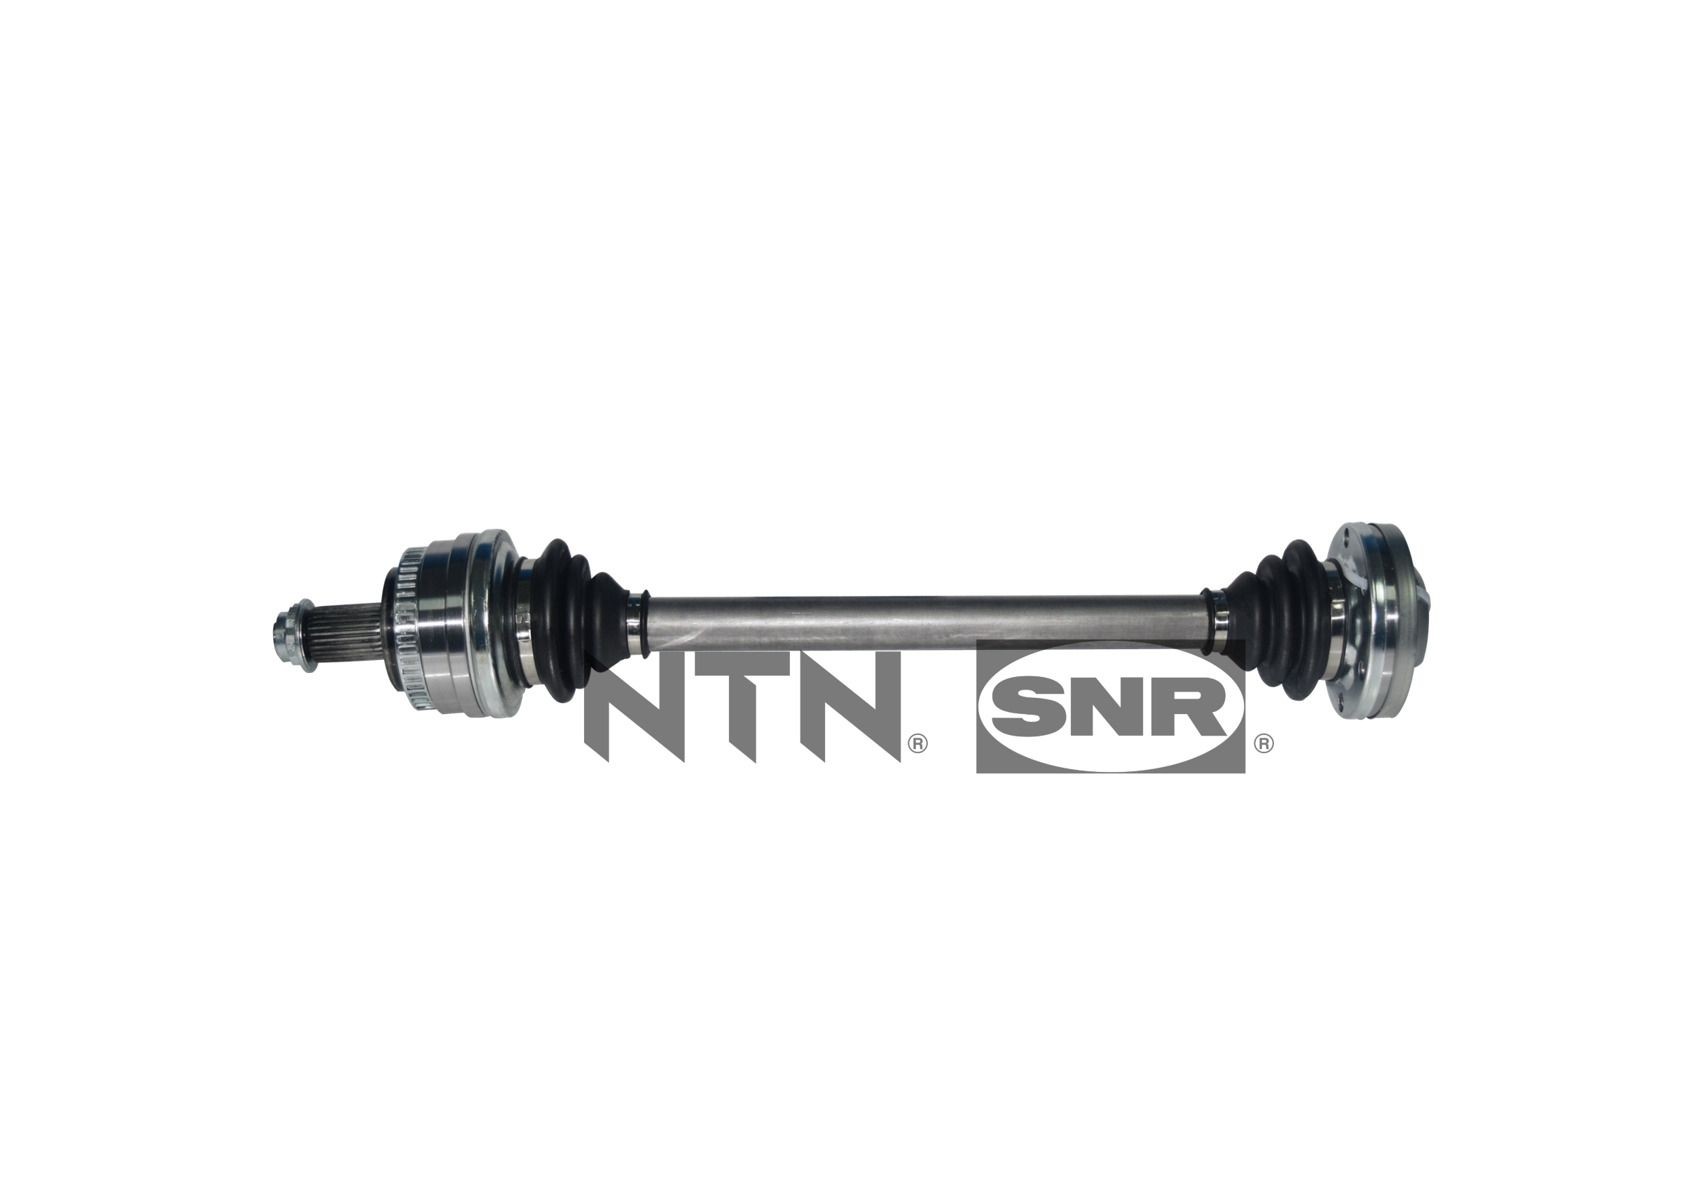 3 Compact (E46) Drive shaft and cv joint parts - Drive shaft SNR DK50.018